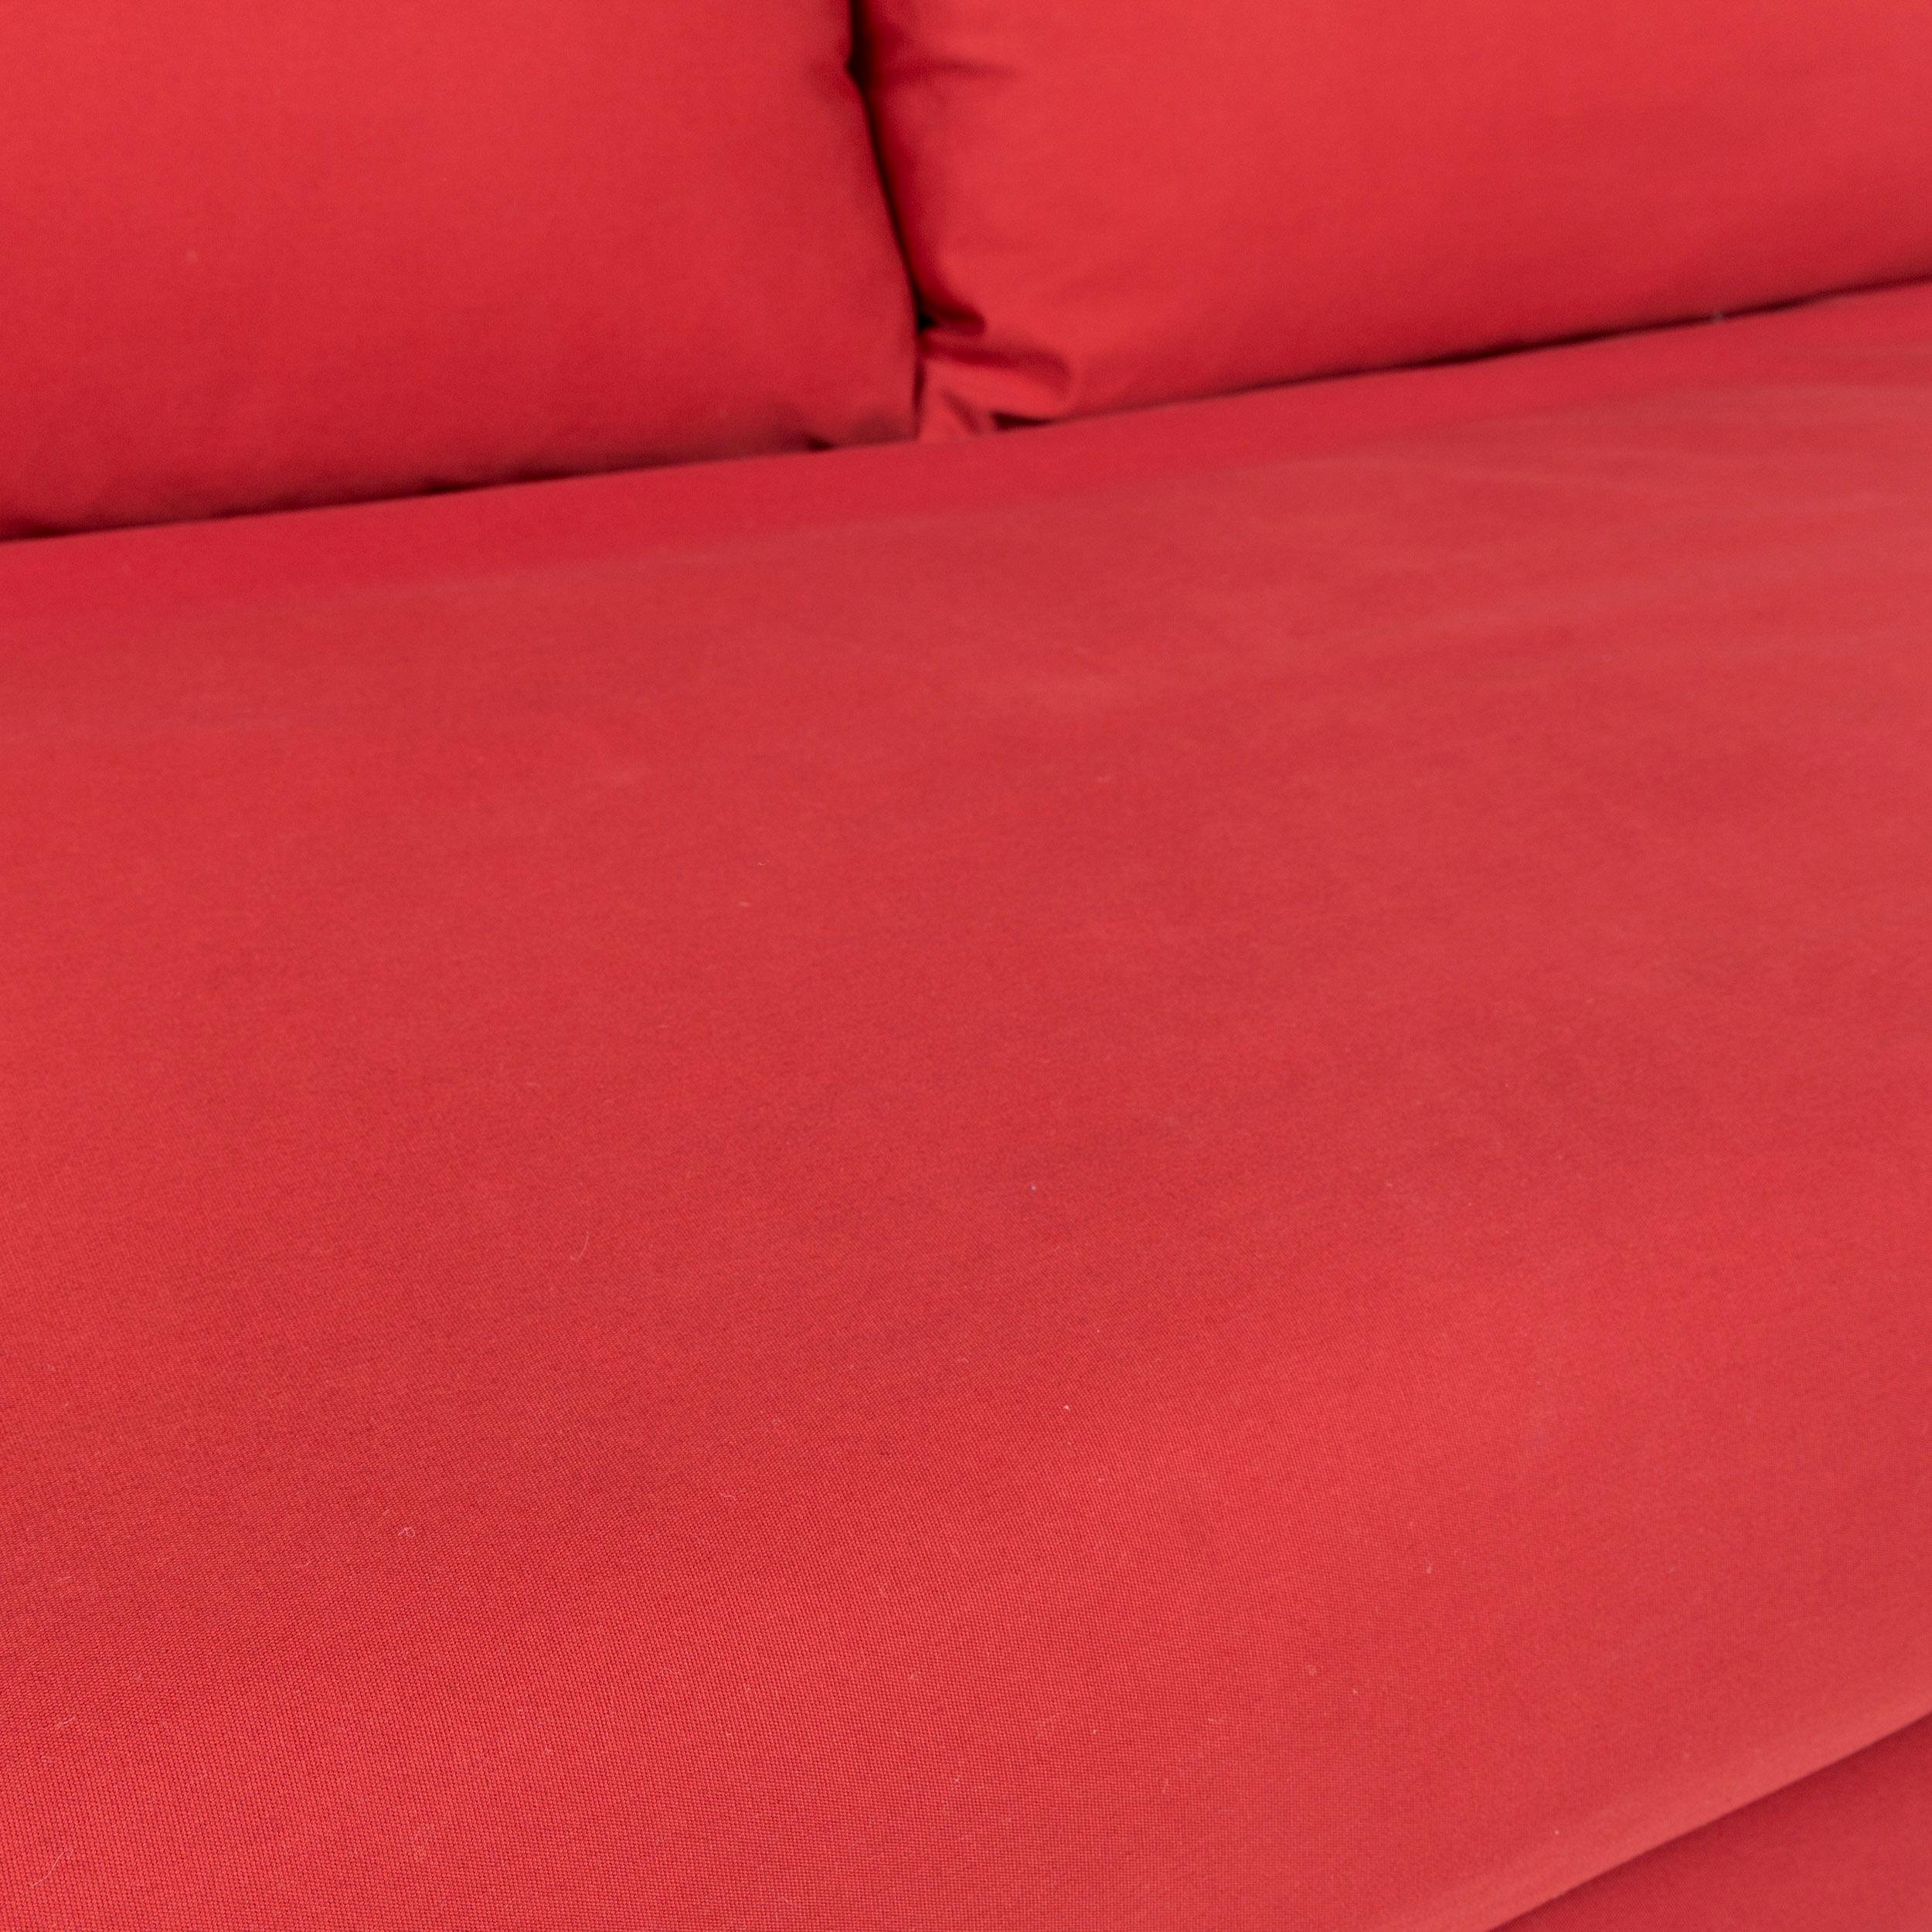 Modern Ligne Roset Multy Fabric Sofa Bed Red Sofa Sleep Function Couch